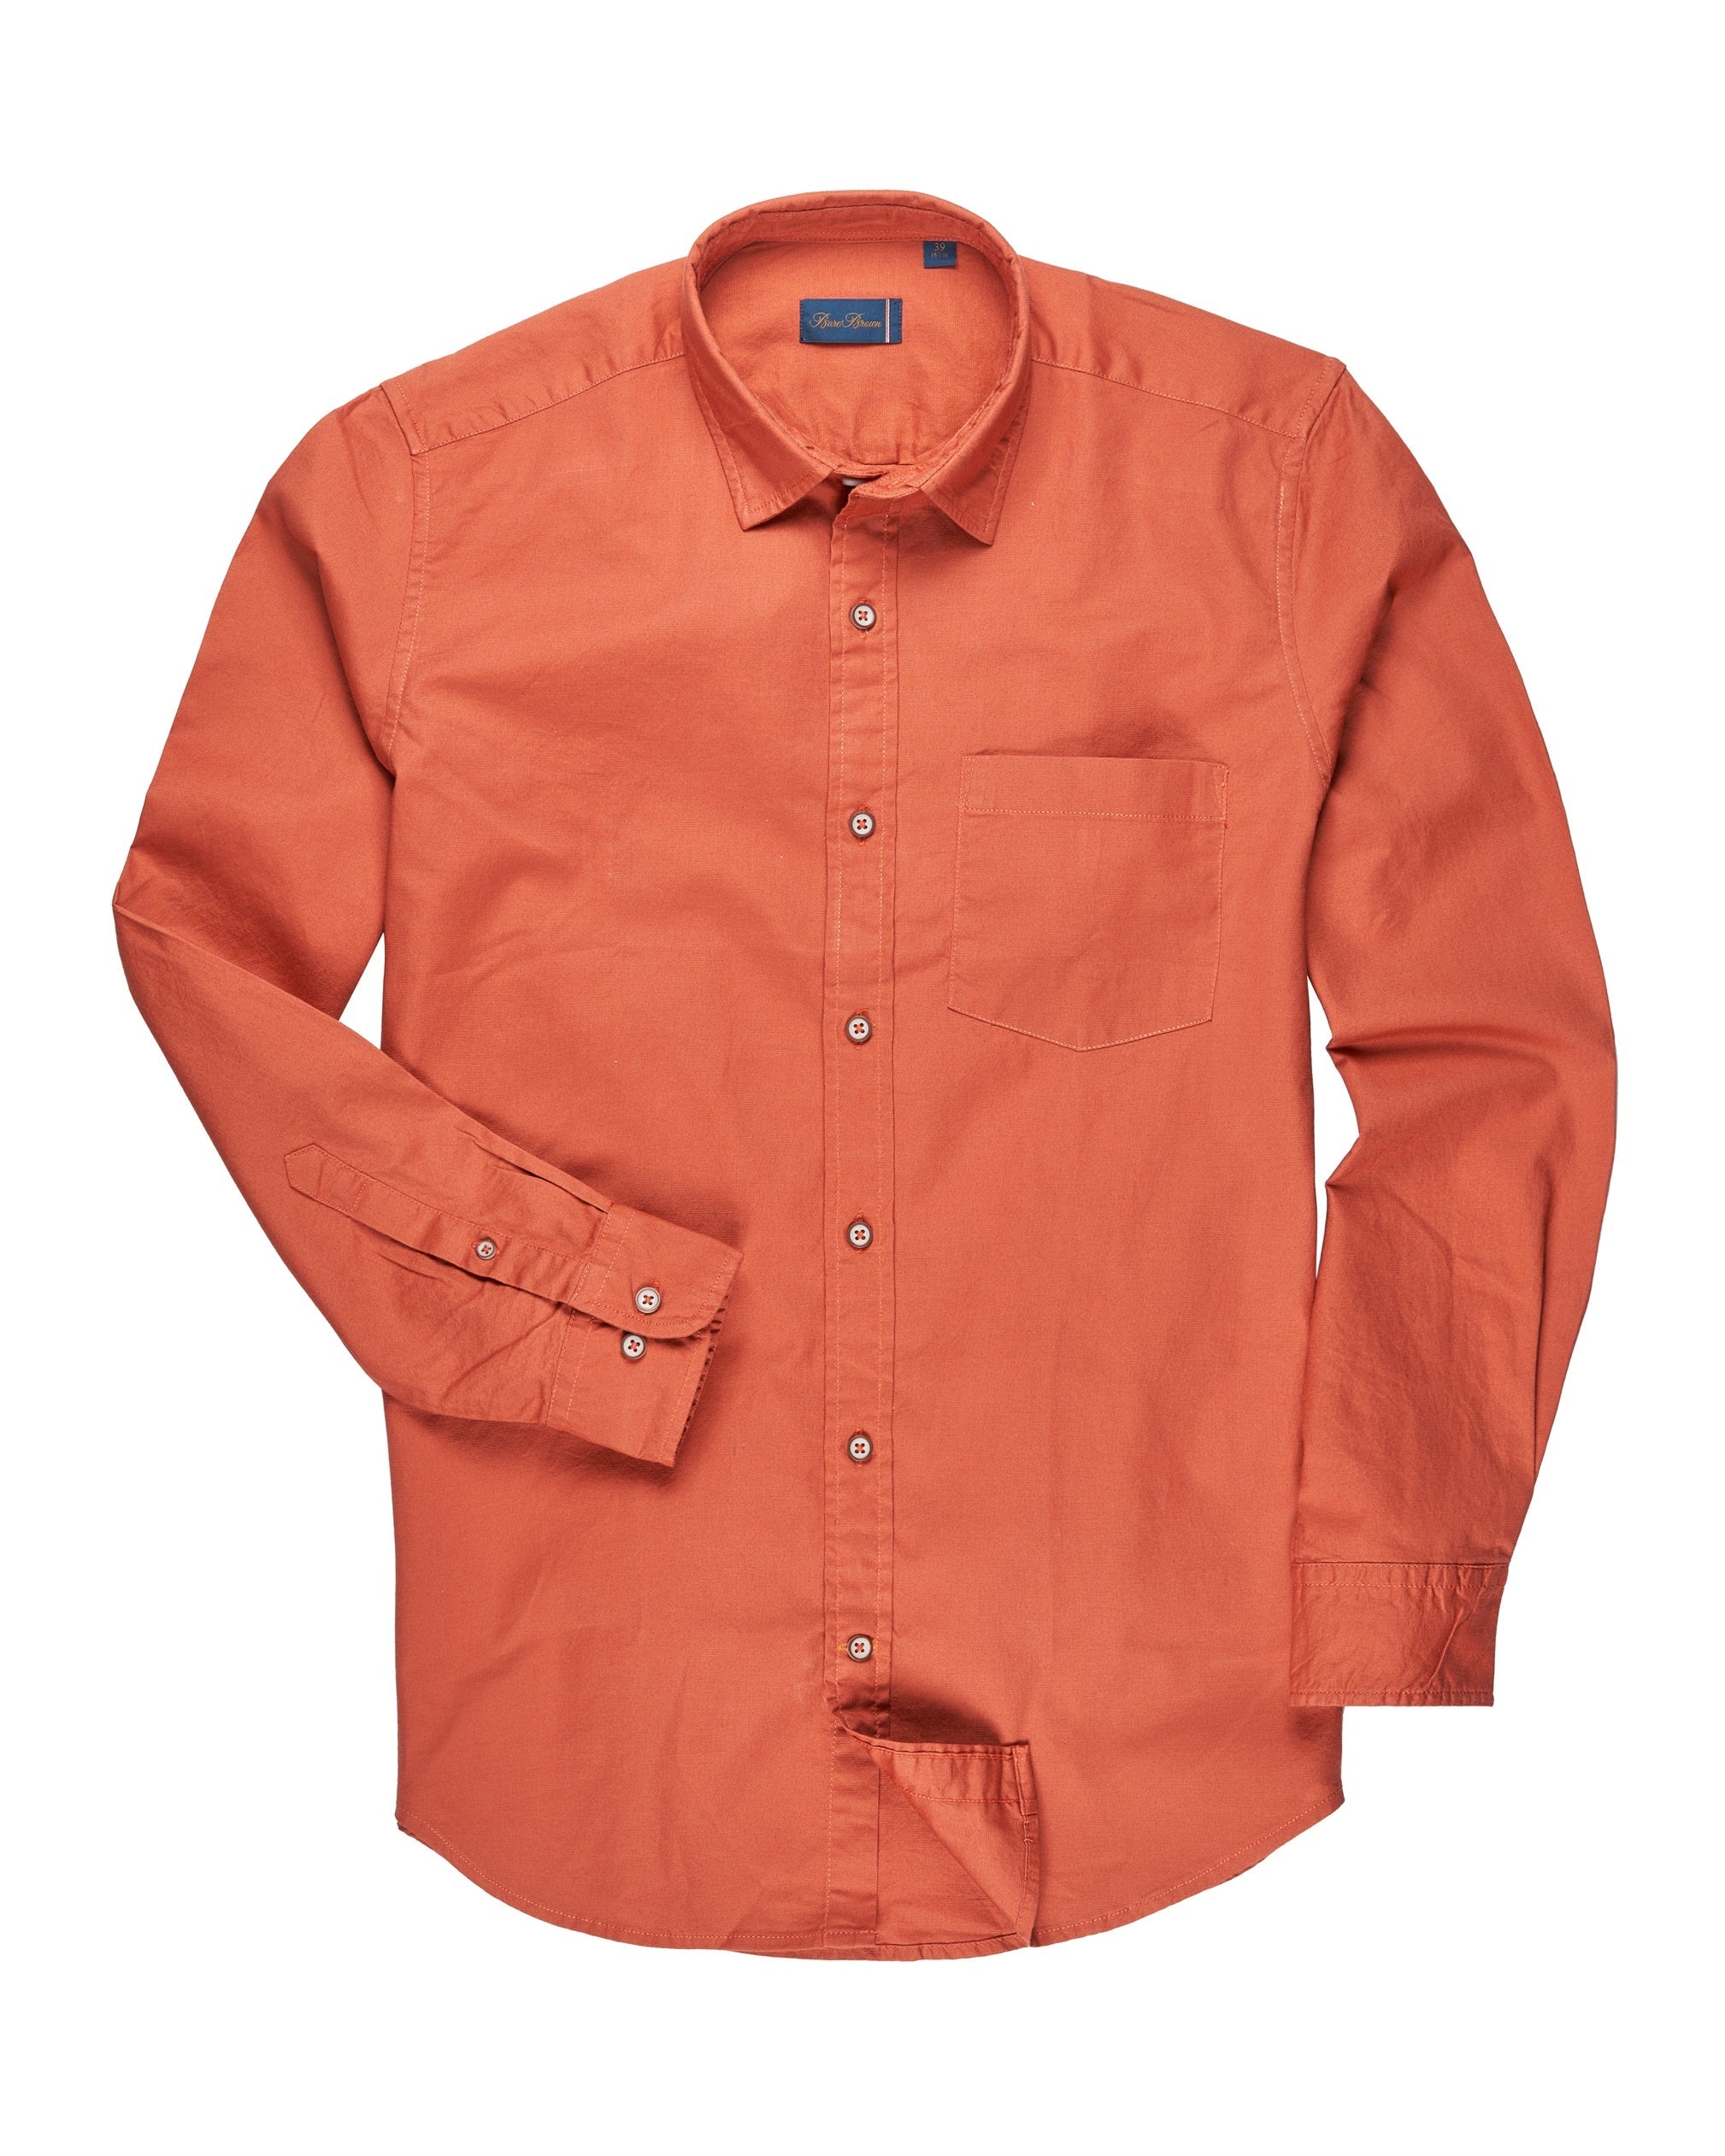 Bare Brown Stretch Cotton Shirt, Slim Fit with Full Sleeves - Rust